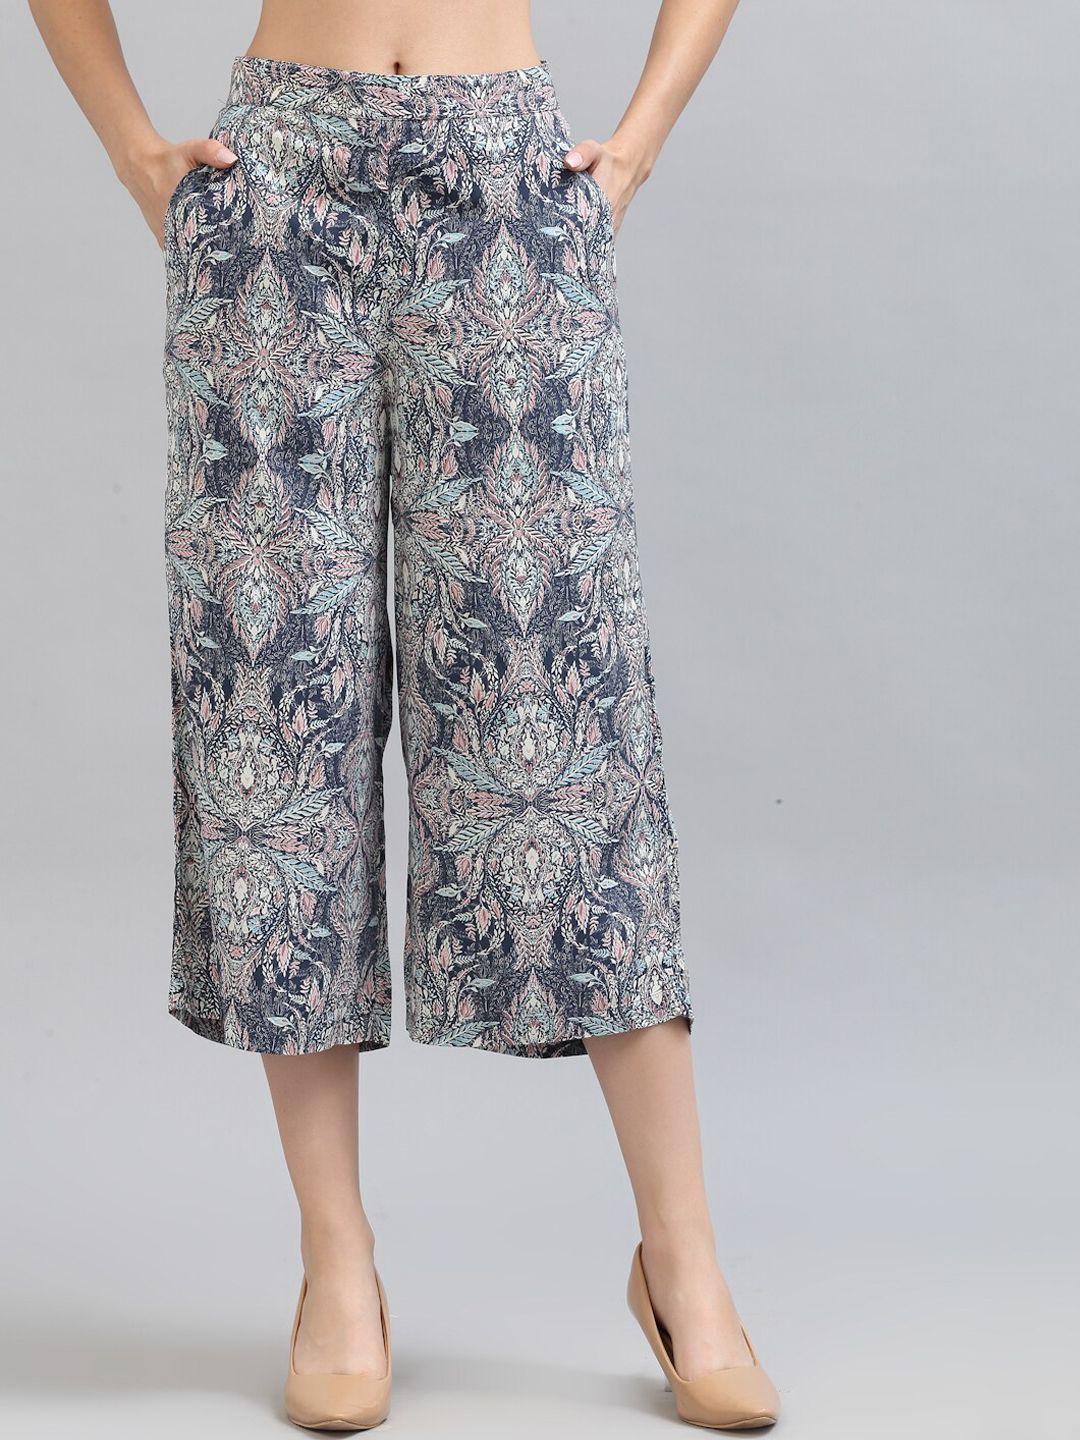 style quotient women blue floral printed culottes trousers